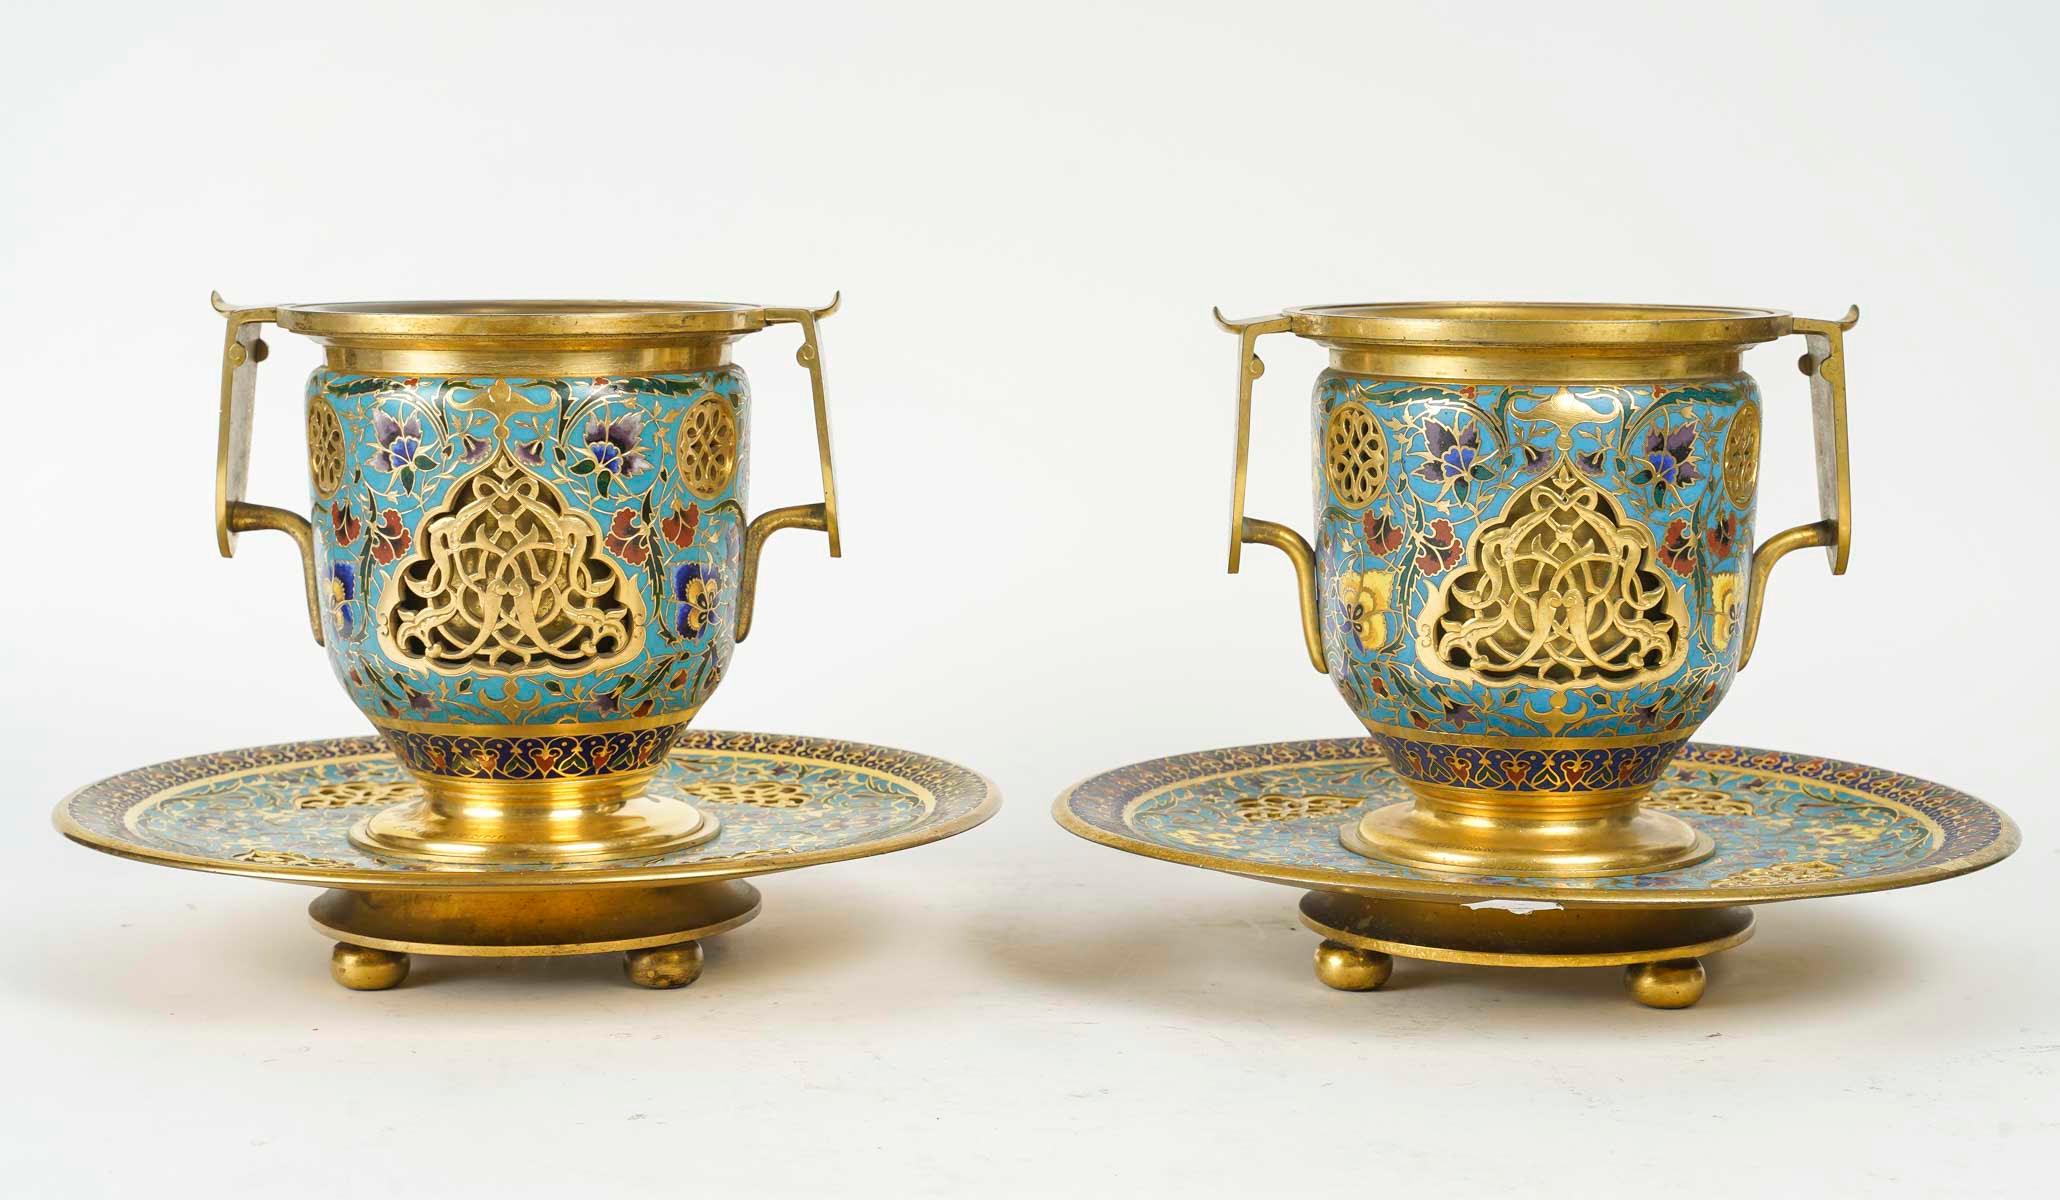 A pair of gilt bronze and enamelled goblets or cache-pots, signed F. Barbedienne, 19th century, Napoleon III period.

A pair of gilt bronze and enamelled goblets, floral design, signed F. Barbedienne, 19th century, Napoleon III period.
h: 21cm, d: